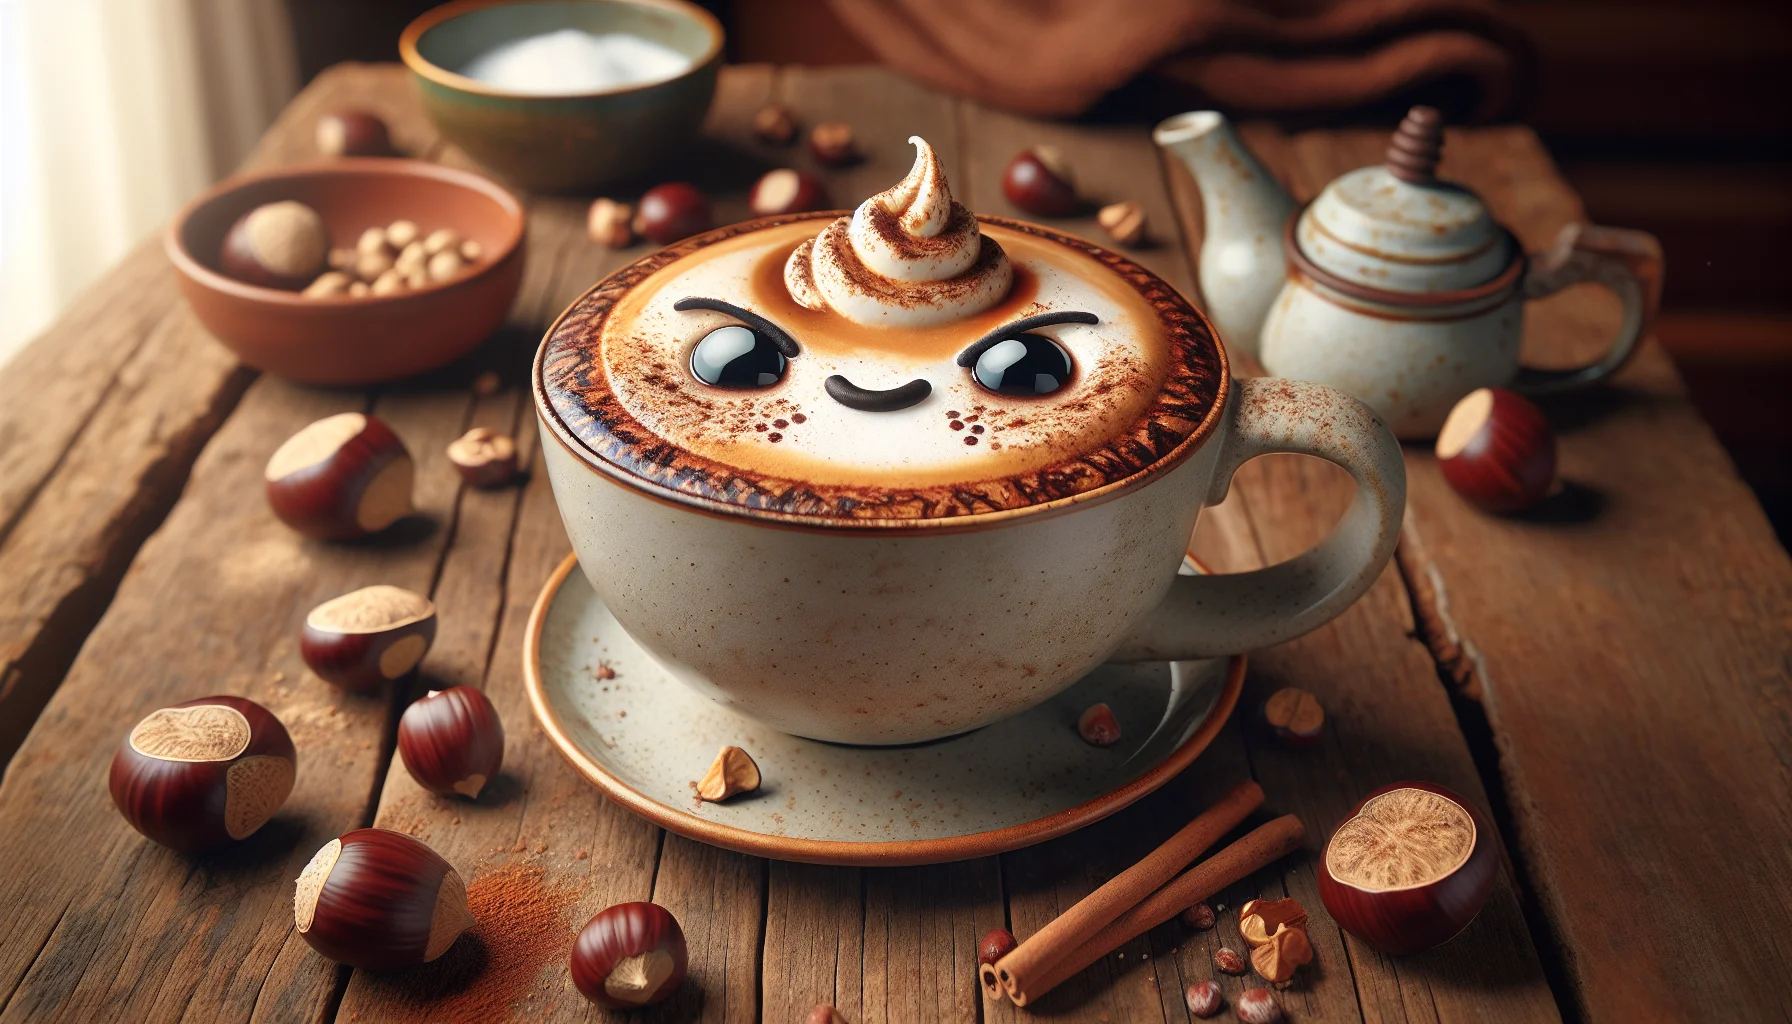 Create an amusing scene of a chestnut praline latte with its frothy, nutty surface and creamy color inside a trendy oversized ceramic mug. The latte sits on a rustic wooden table and seems to have a cartoonish, oddly cute face drawn in latte art on its surface, expressing an inviting aura. Bizarrely enough, small cartoonish arms on the sides of the mug appear to be beckoning people in. Around the mug, there are scattered chestnuts and a dusting of spices, suggesting a playful chaos. The warm, cozy atmosphere of the room suggests a festive, winter setting, encouraging viewers to sample the inviting drink.